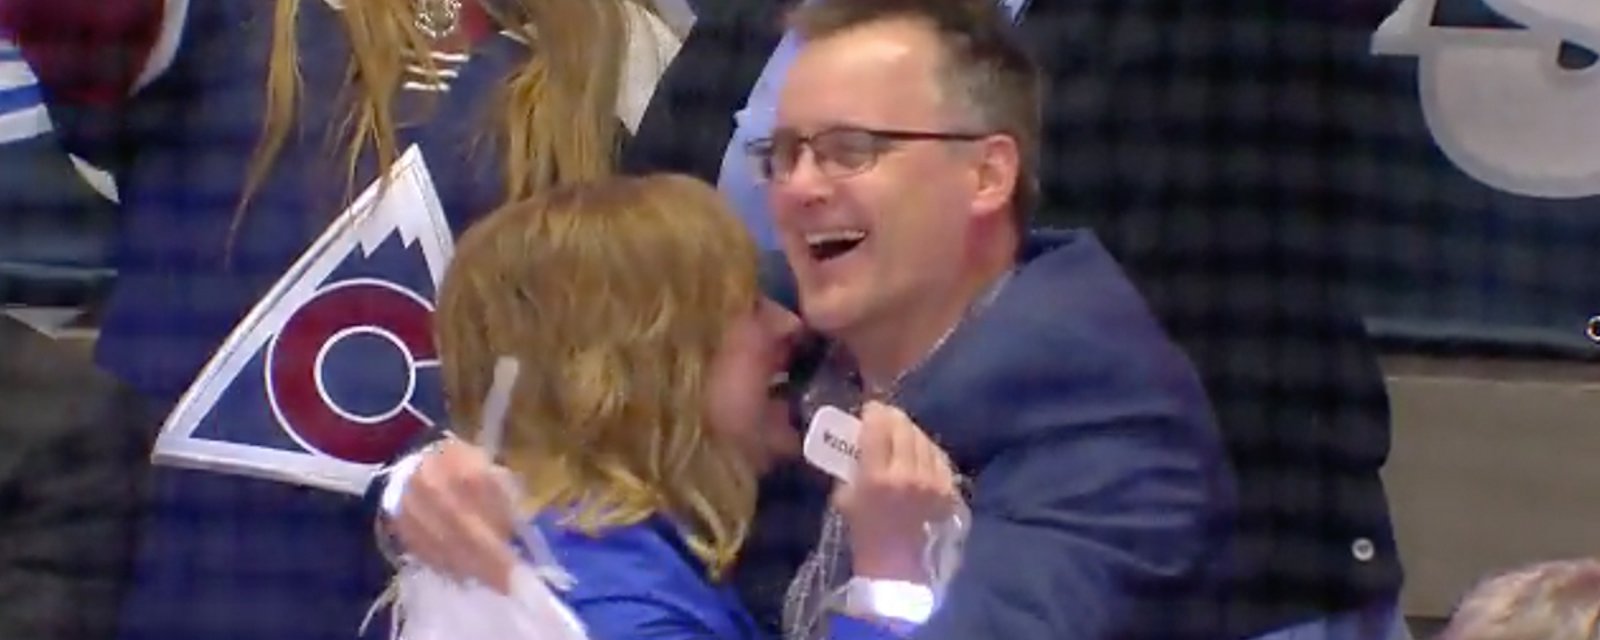 Cale Makar’s parents are overcome with joy after he scores his first NHL goal in his first NHL game